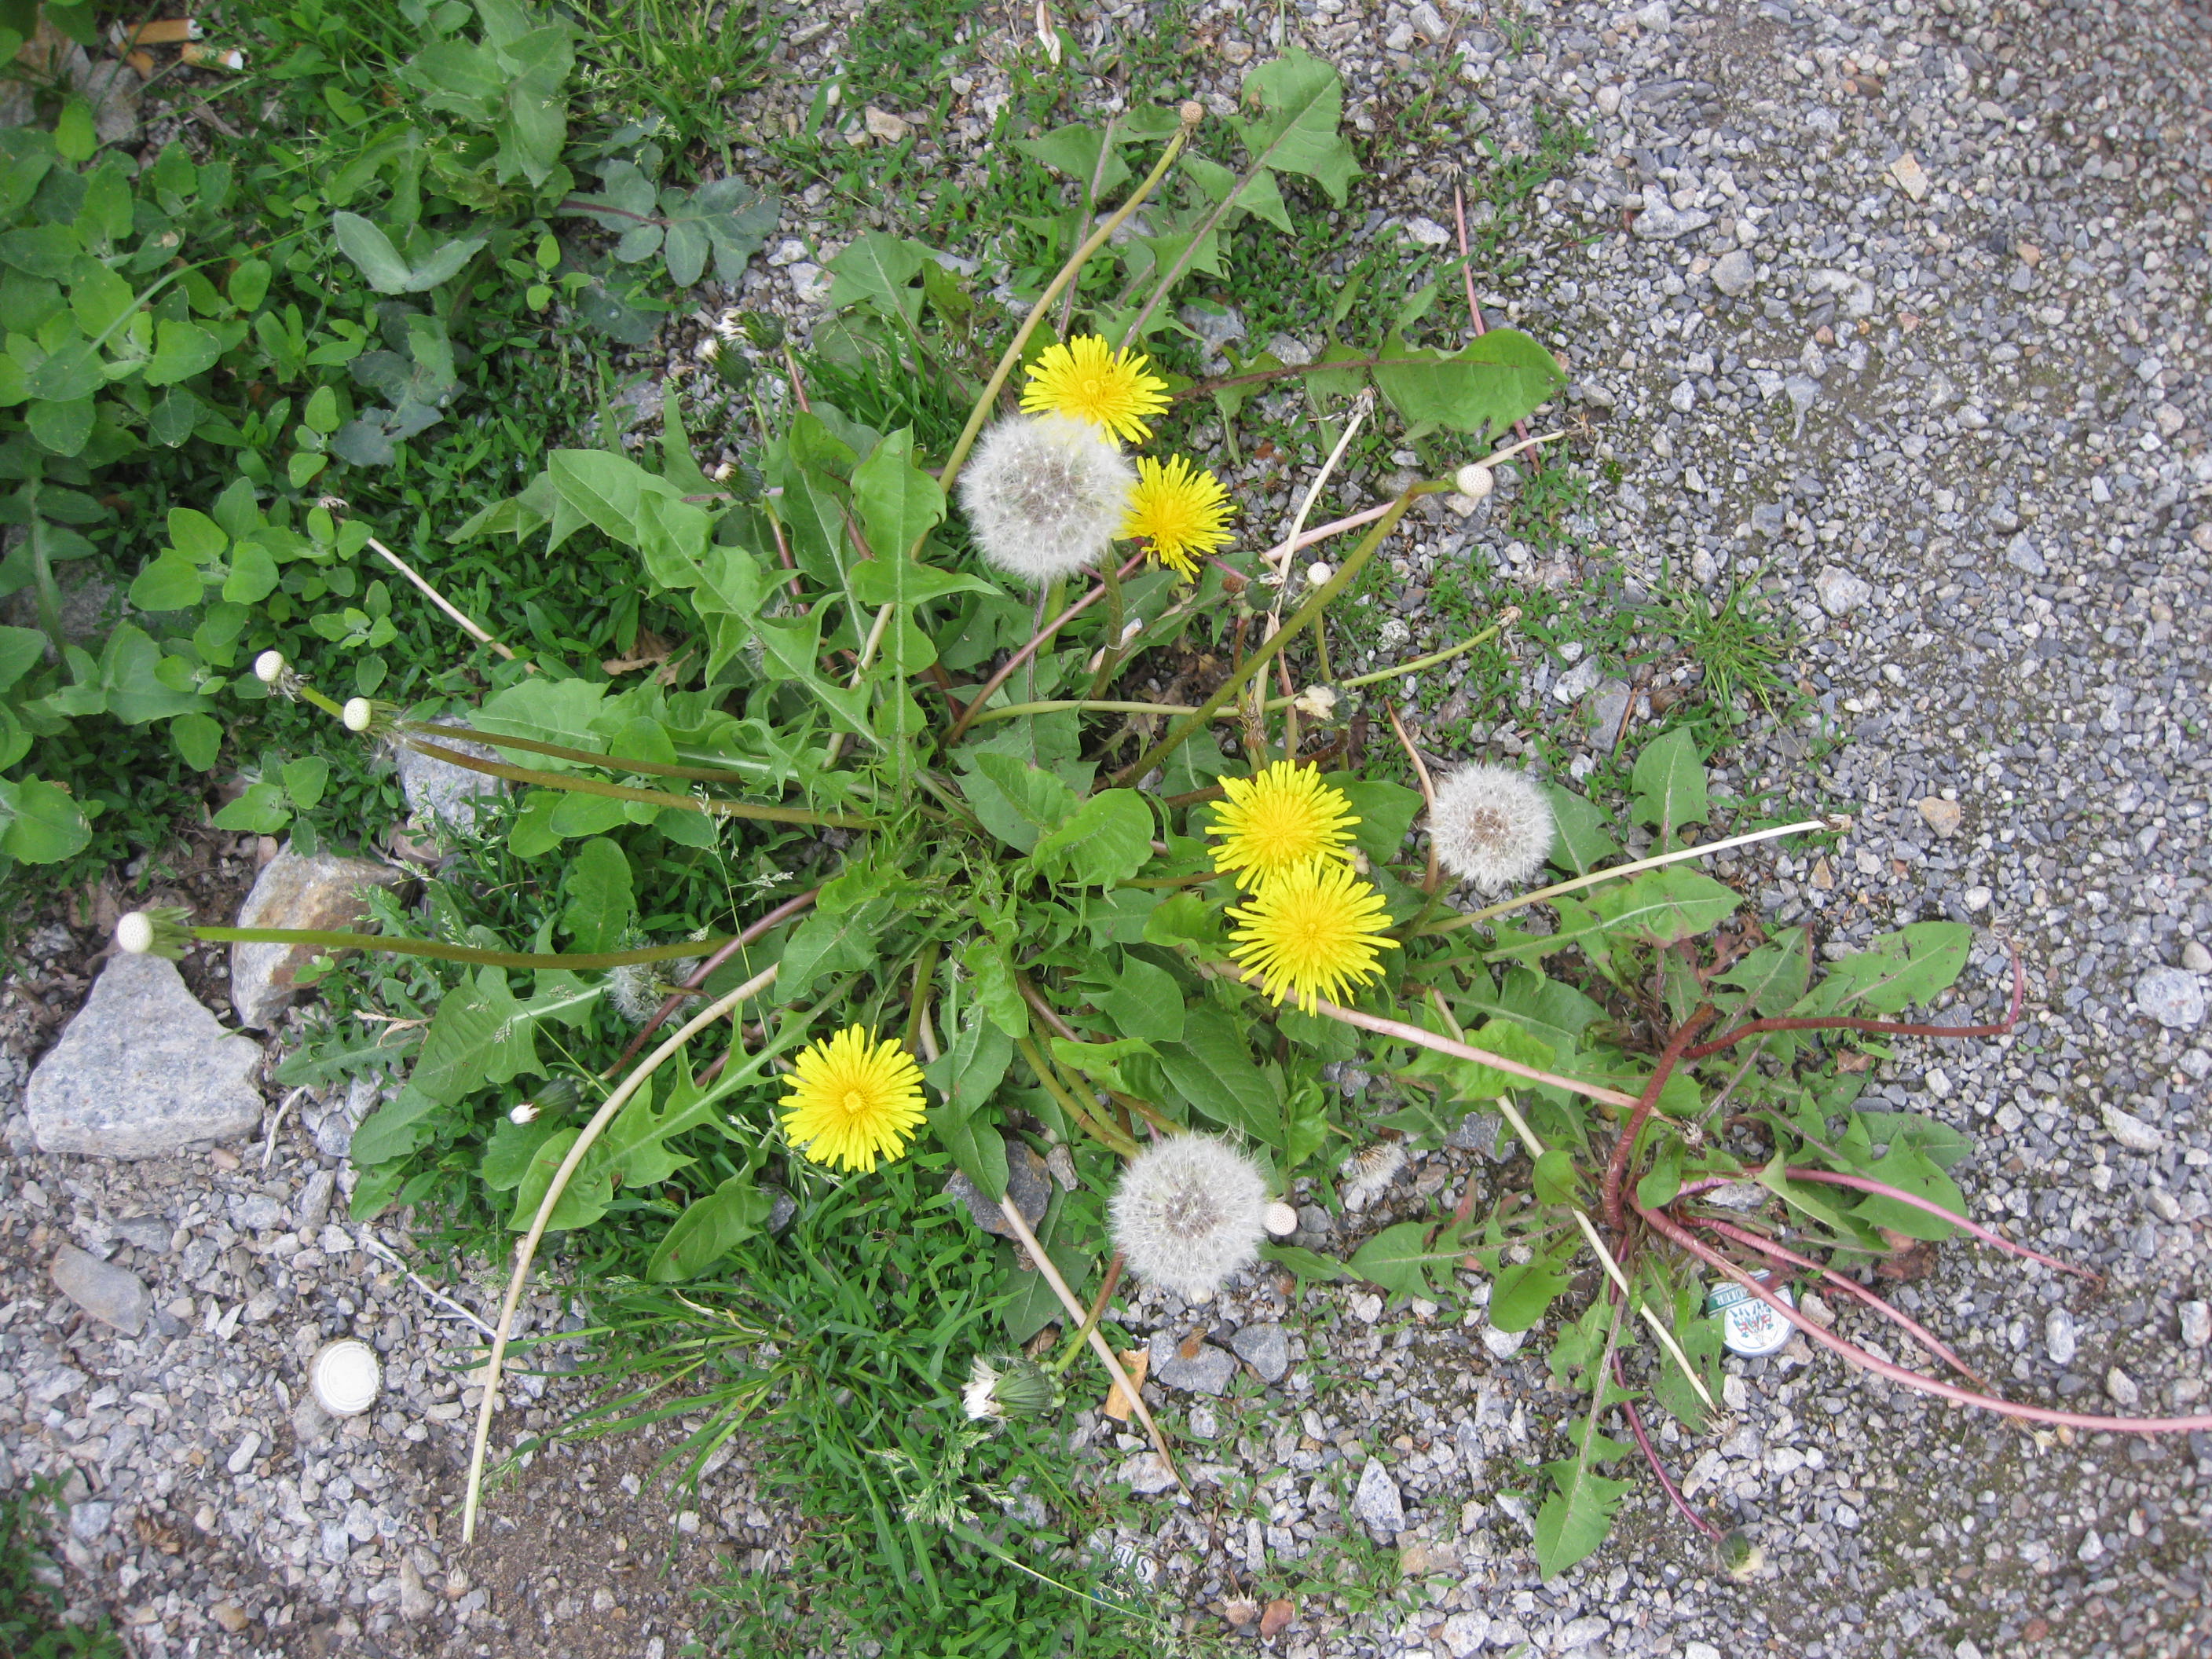 Common dandelion with open flowers and fruits.